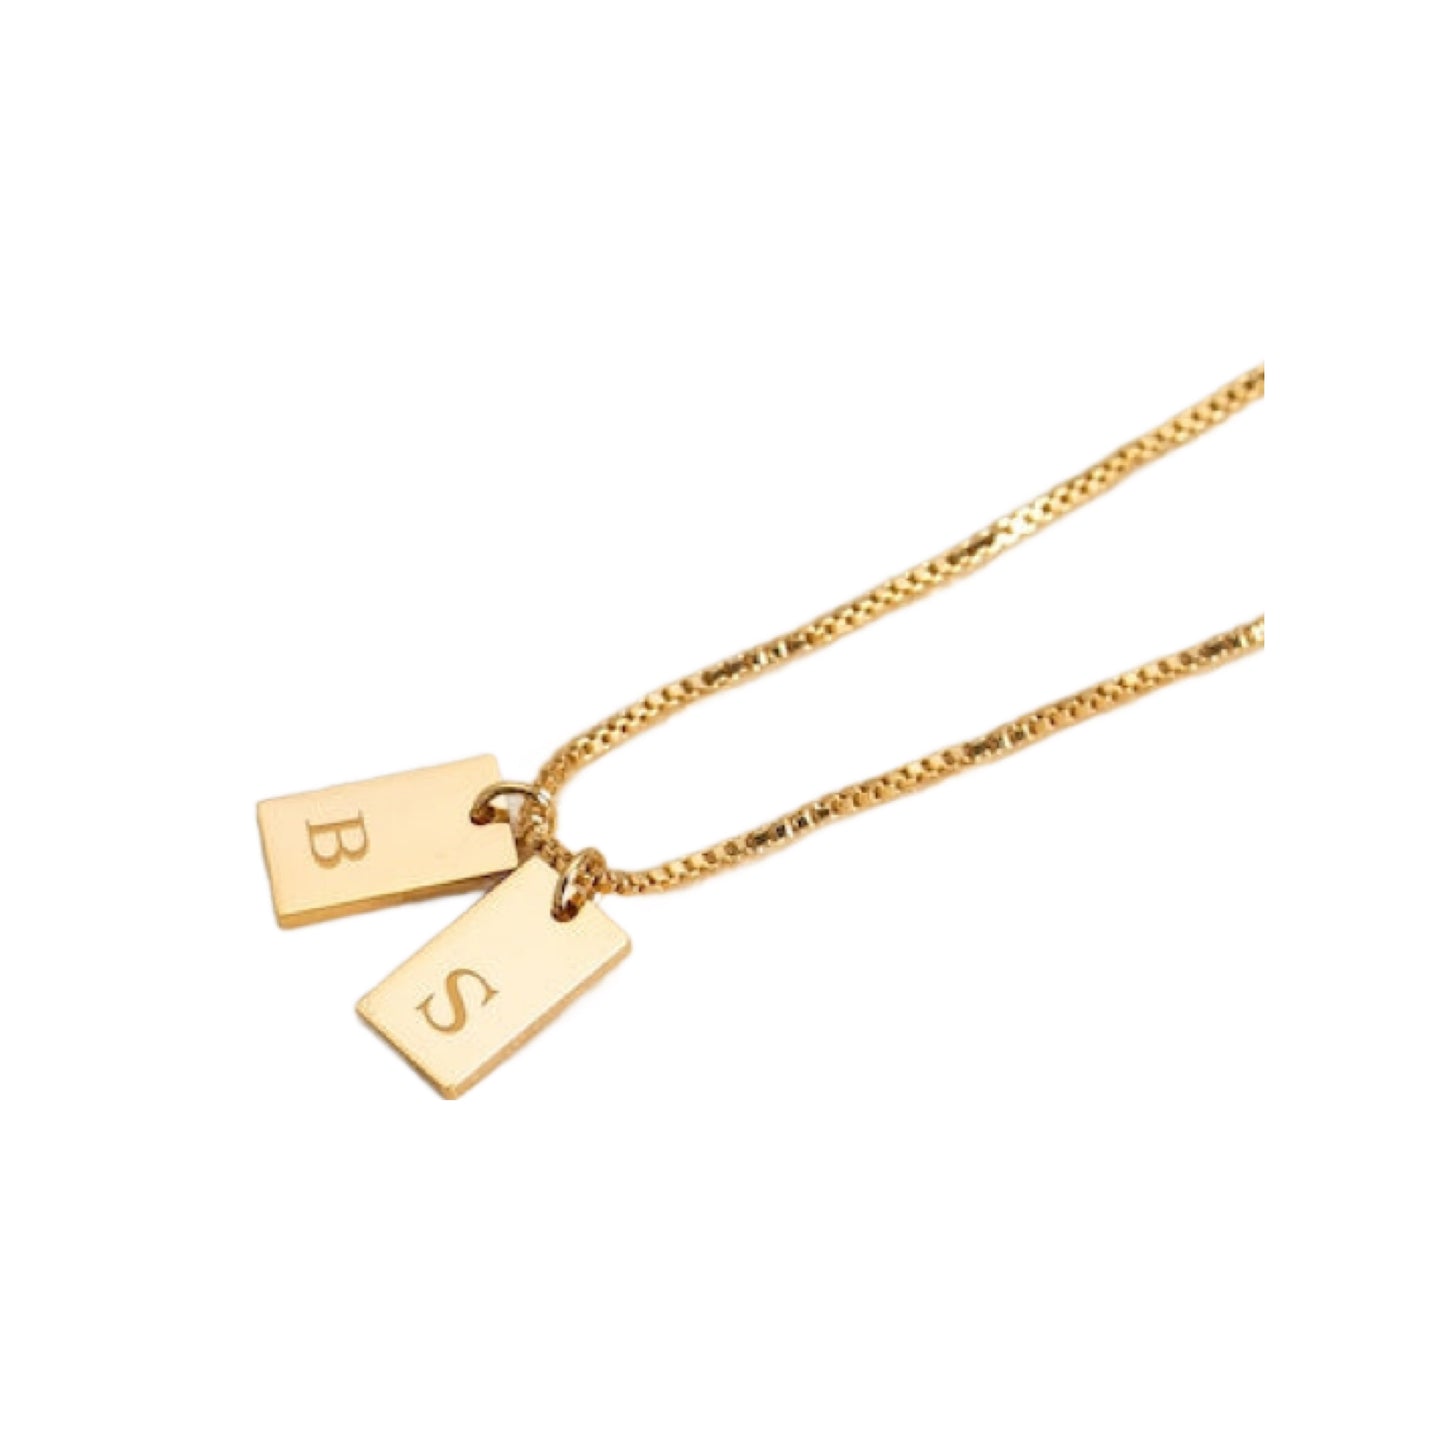 The Jones Tag Necklace